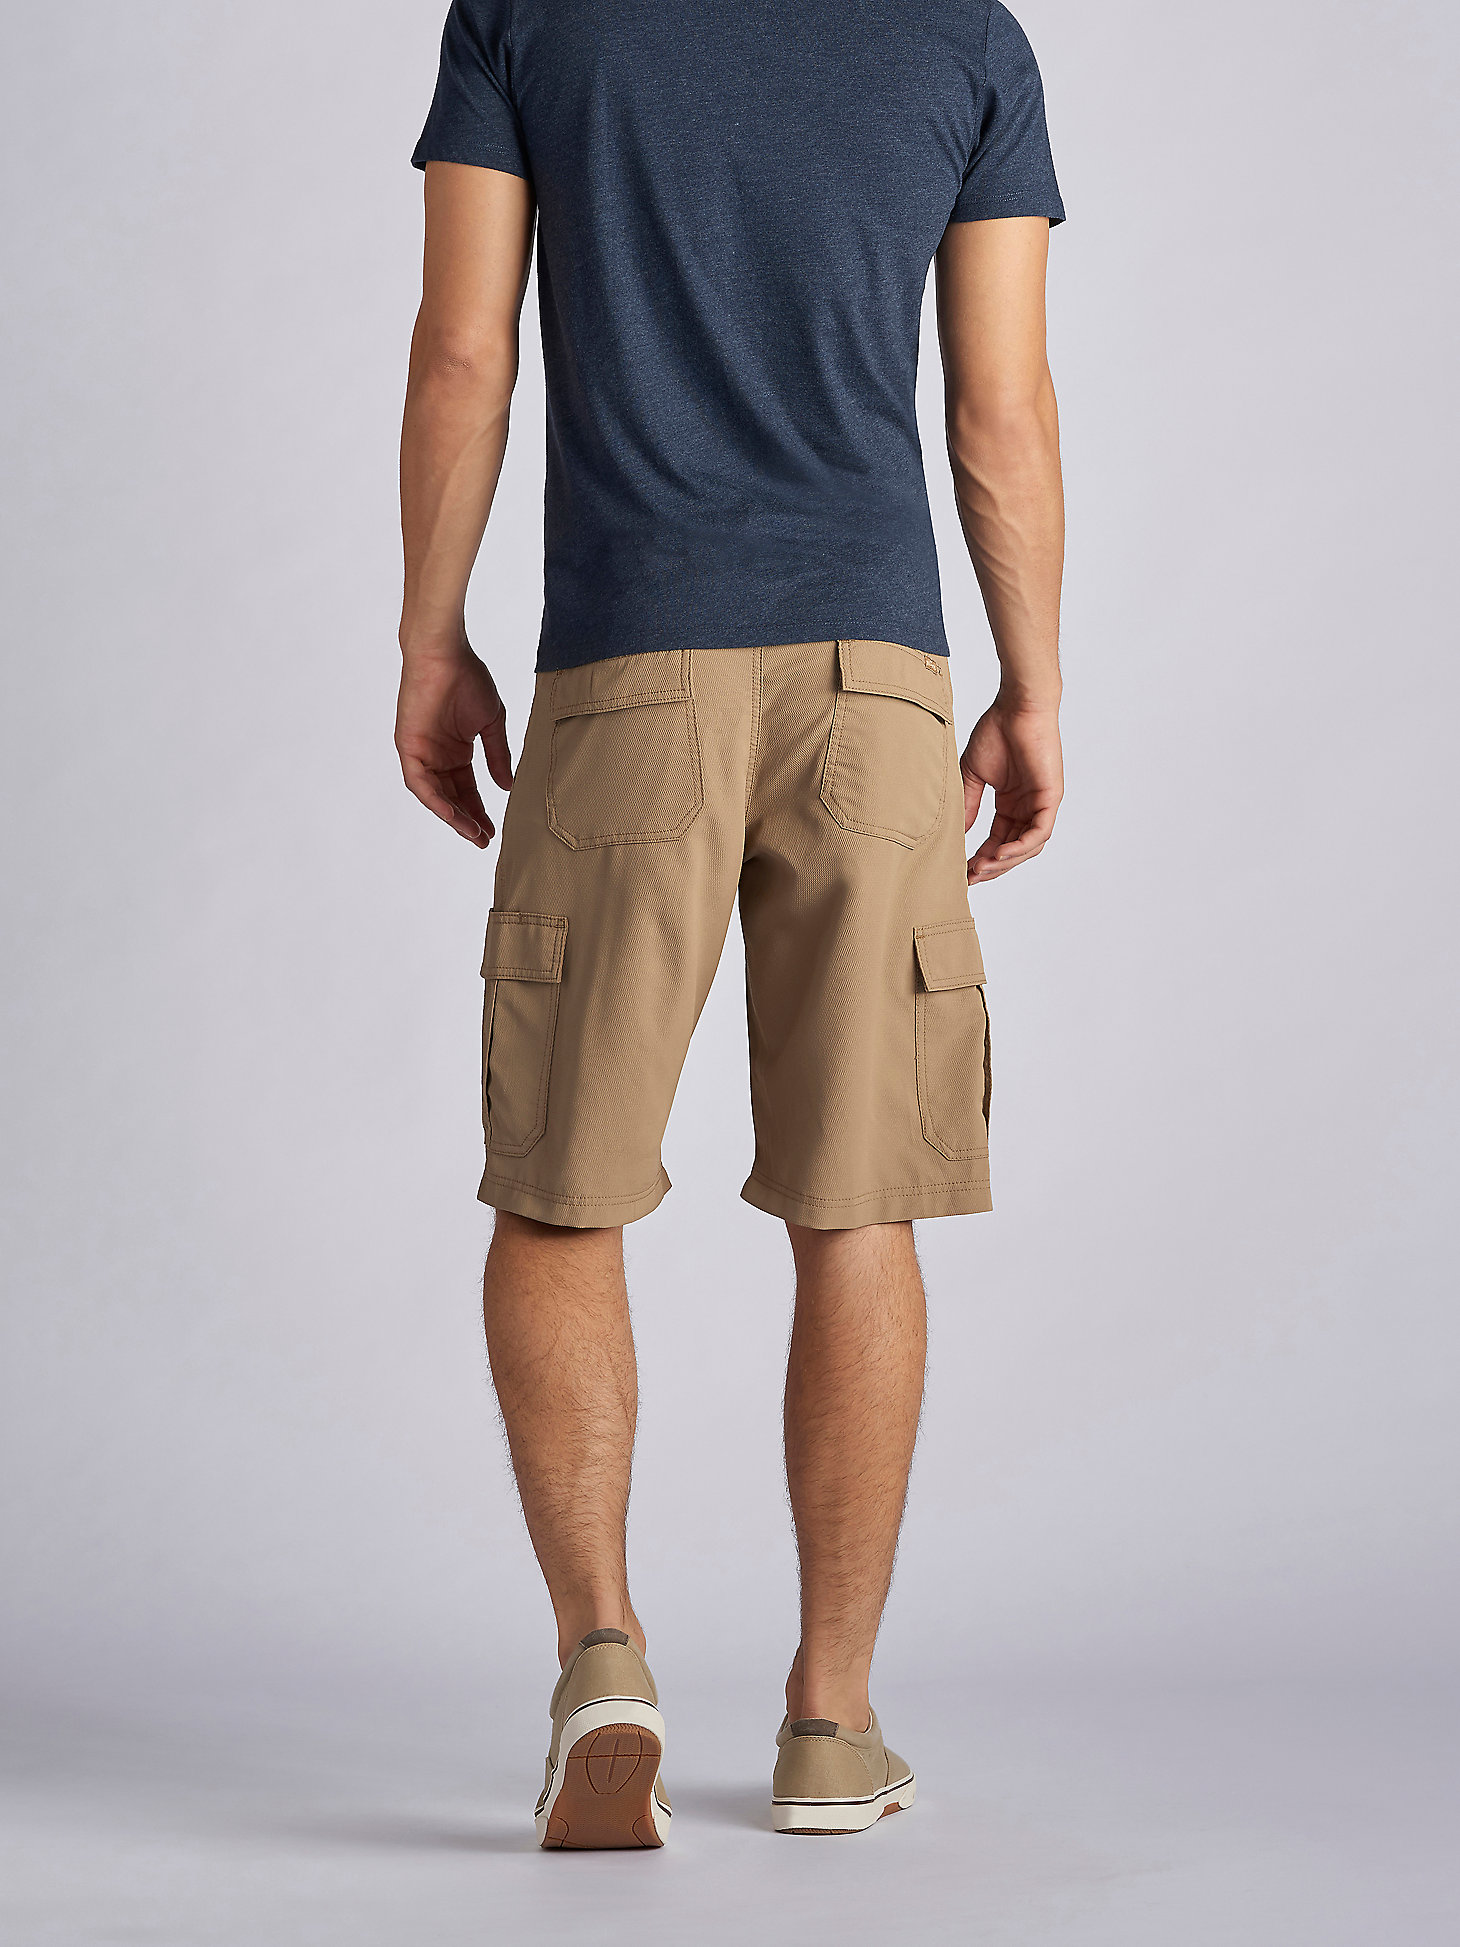 Men’s Lee Performance Cargo Short (Big&Tall) in Silver alternative view 1